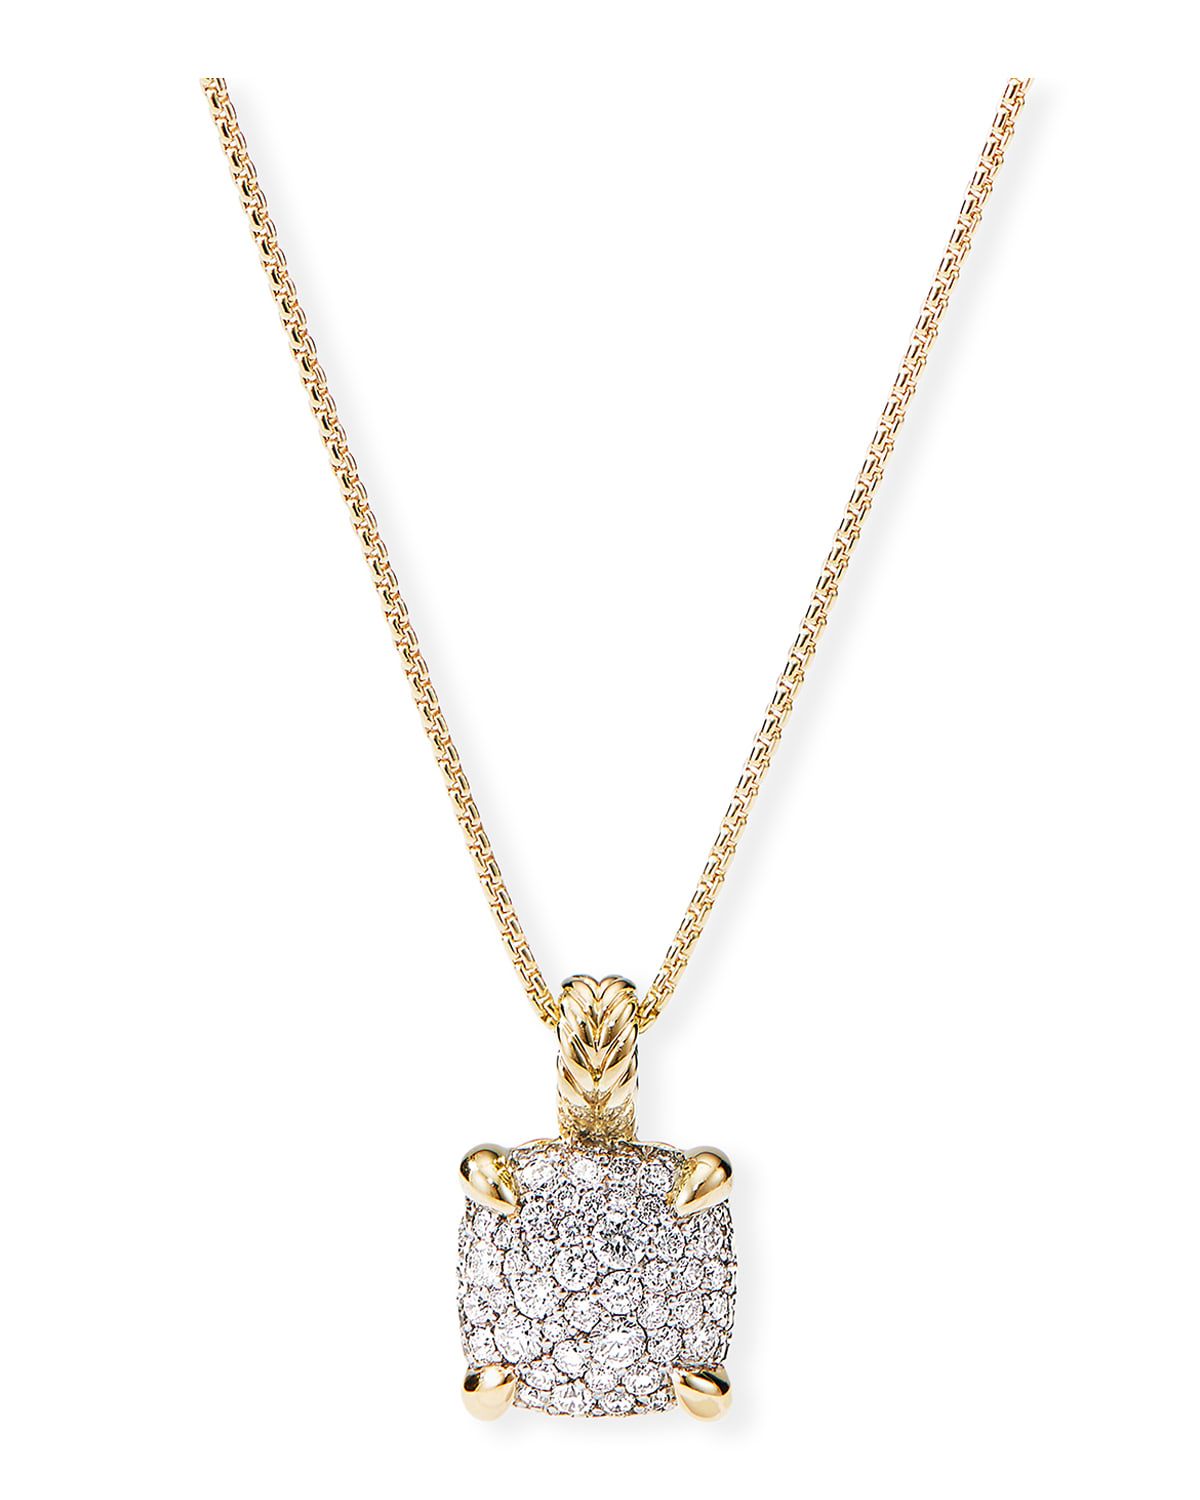 Natural Diamond Pave Square Pendant Necklace In 14k Yellow Gold Over Sterling